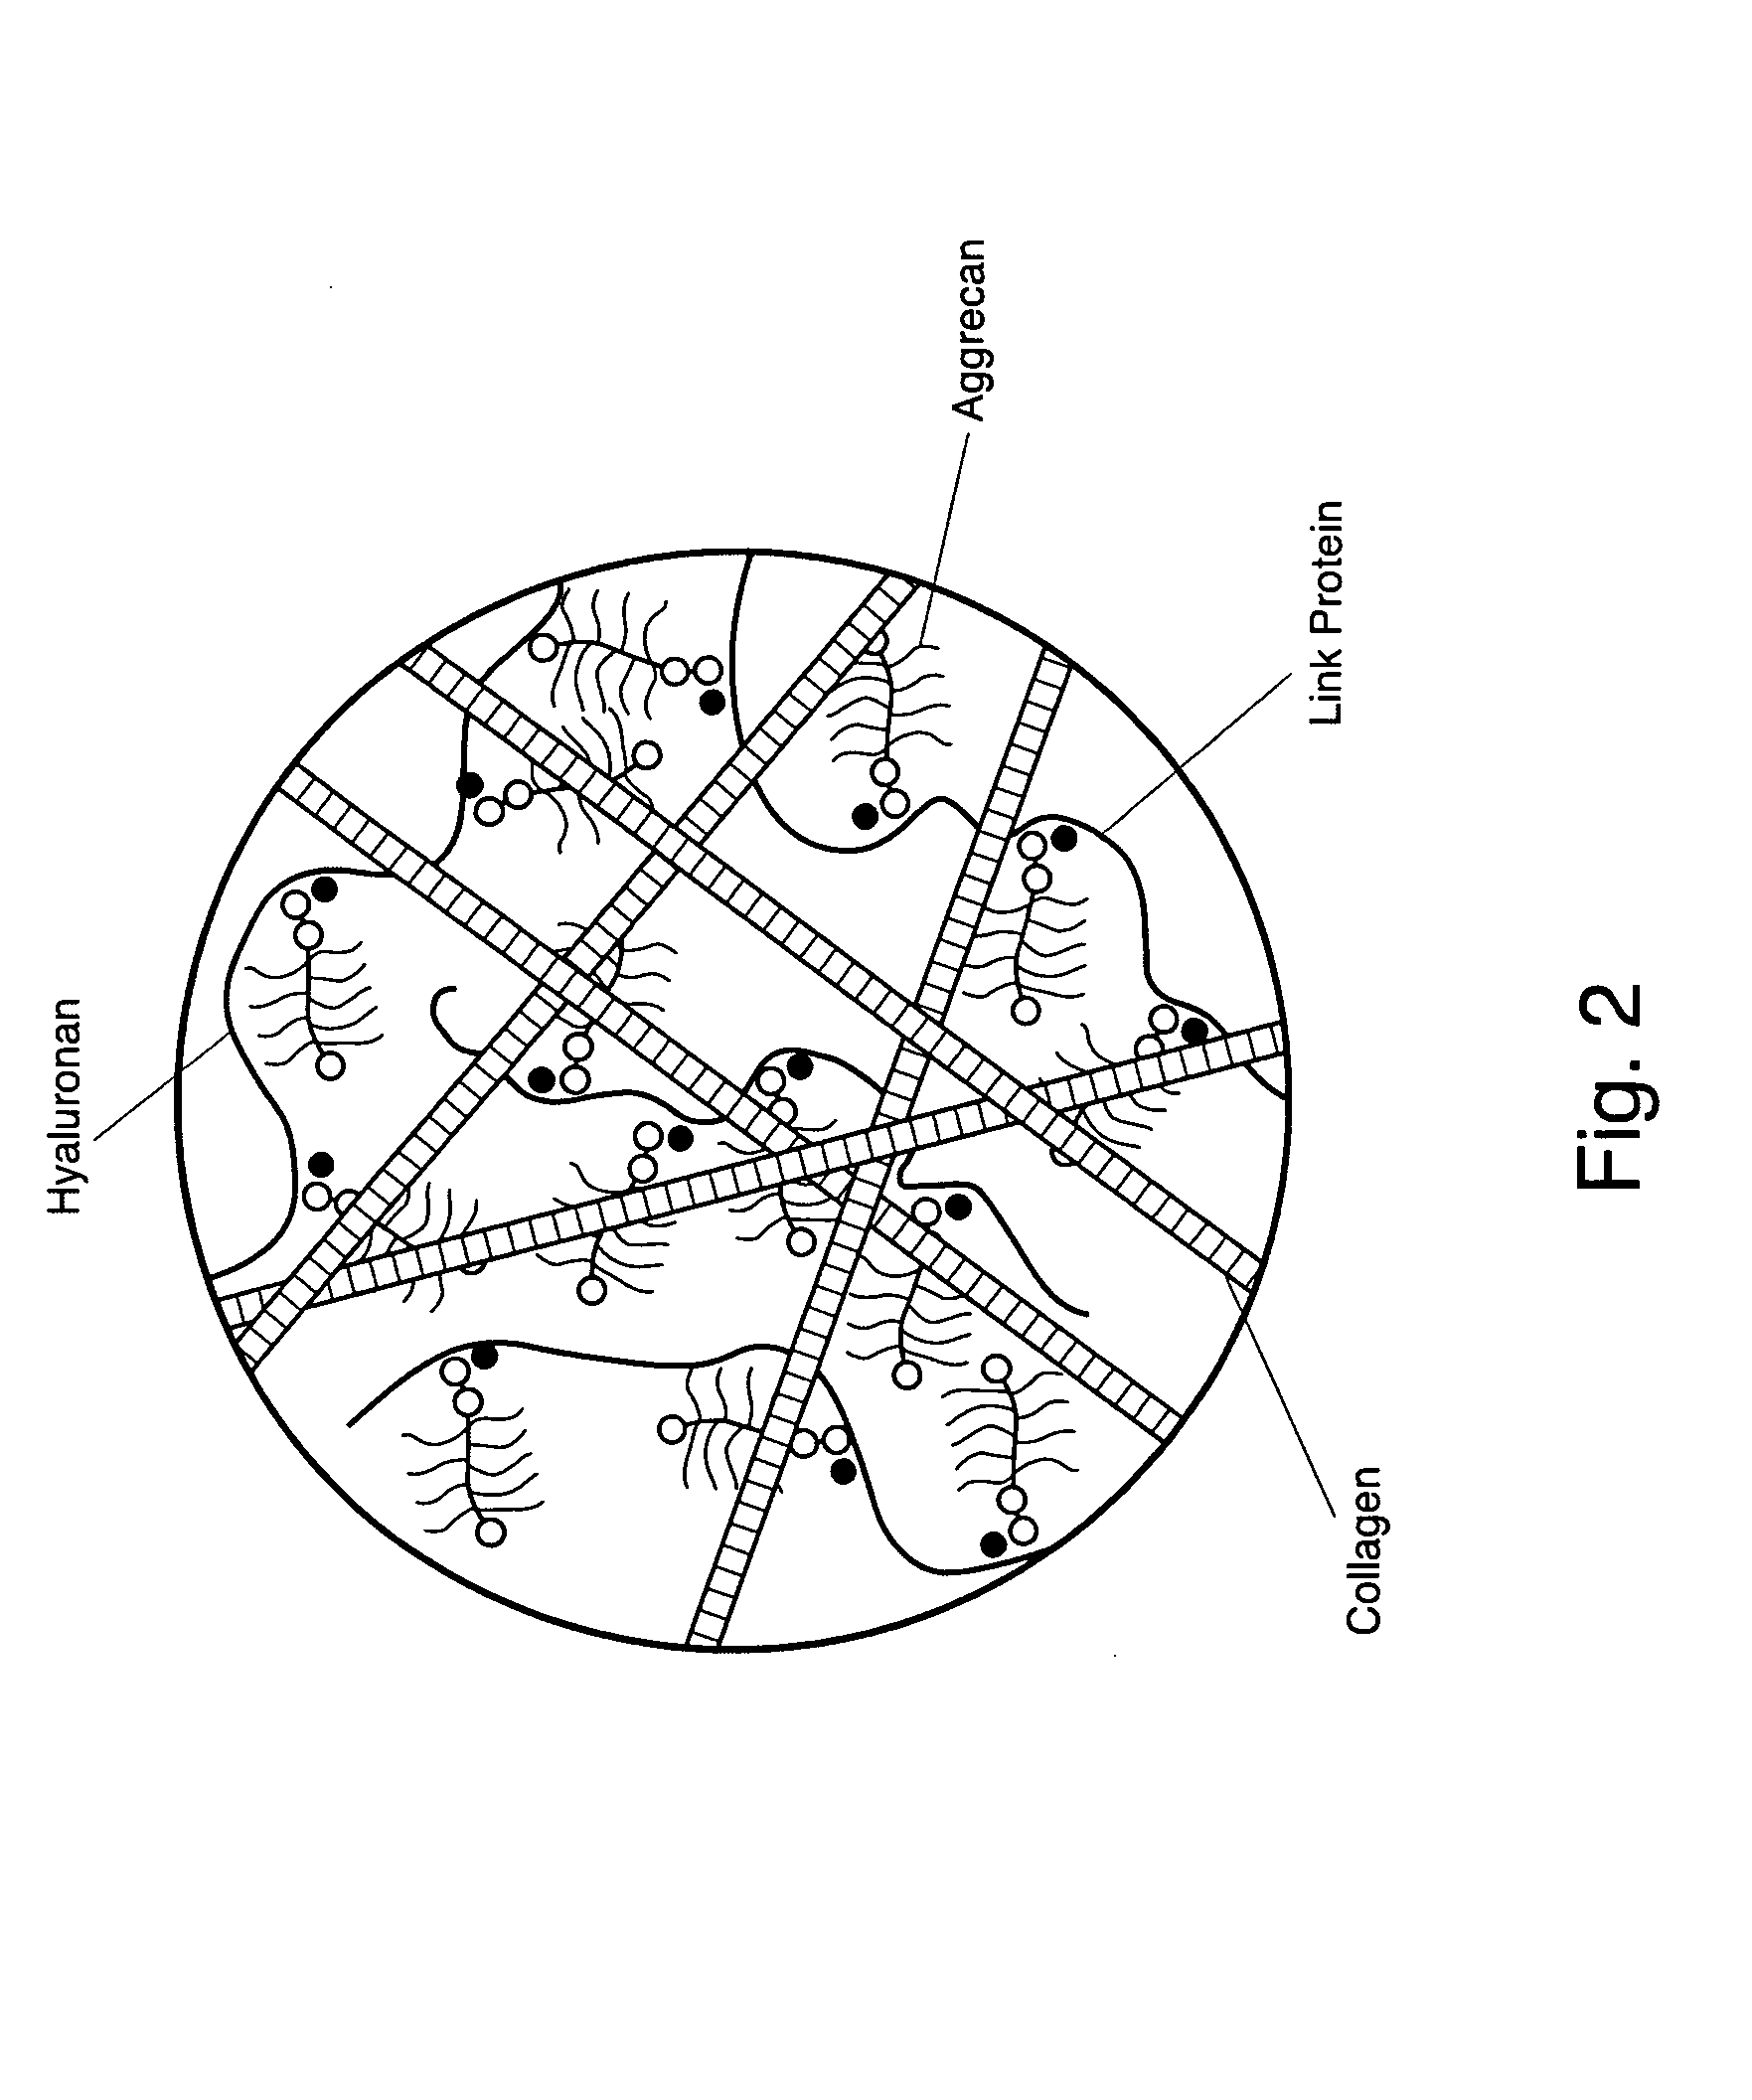 Method for treating cartilage defects